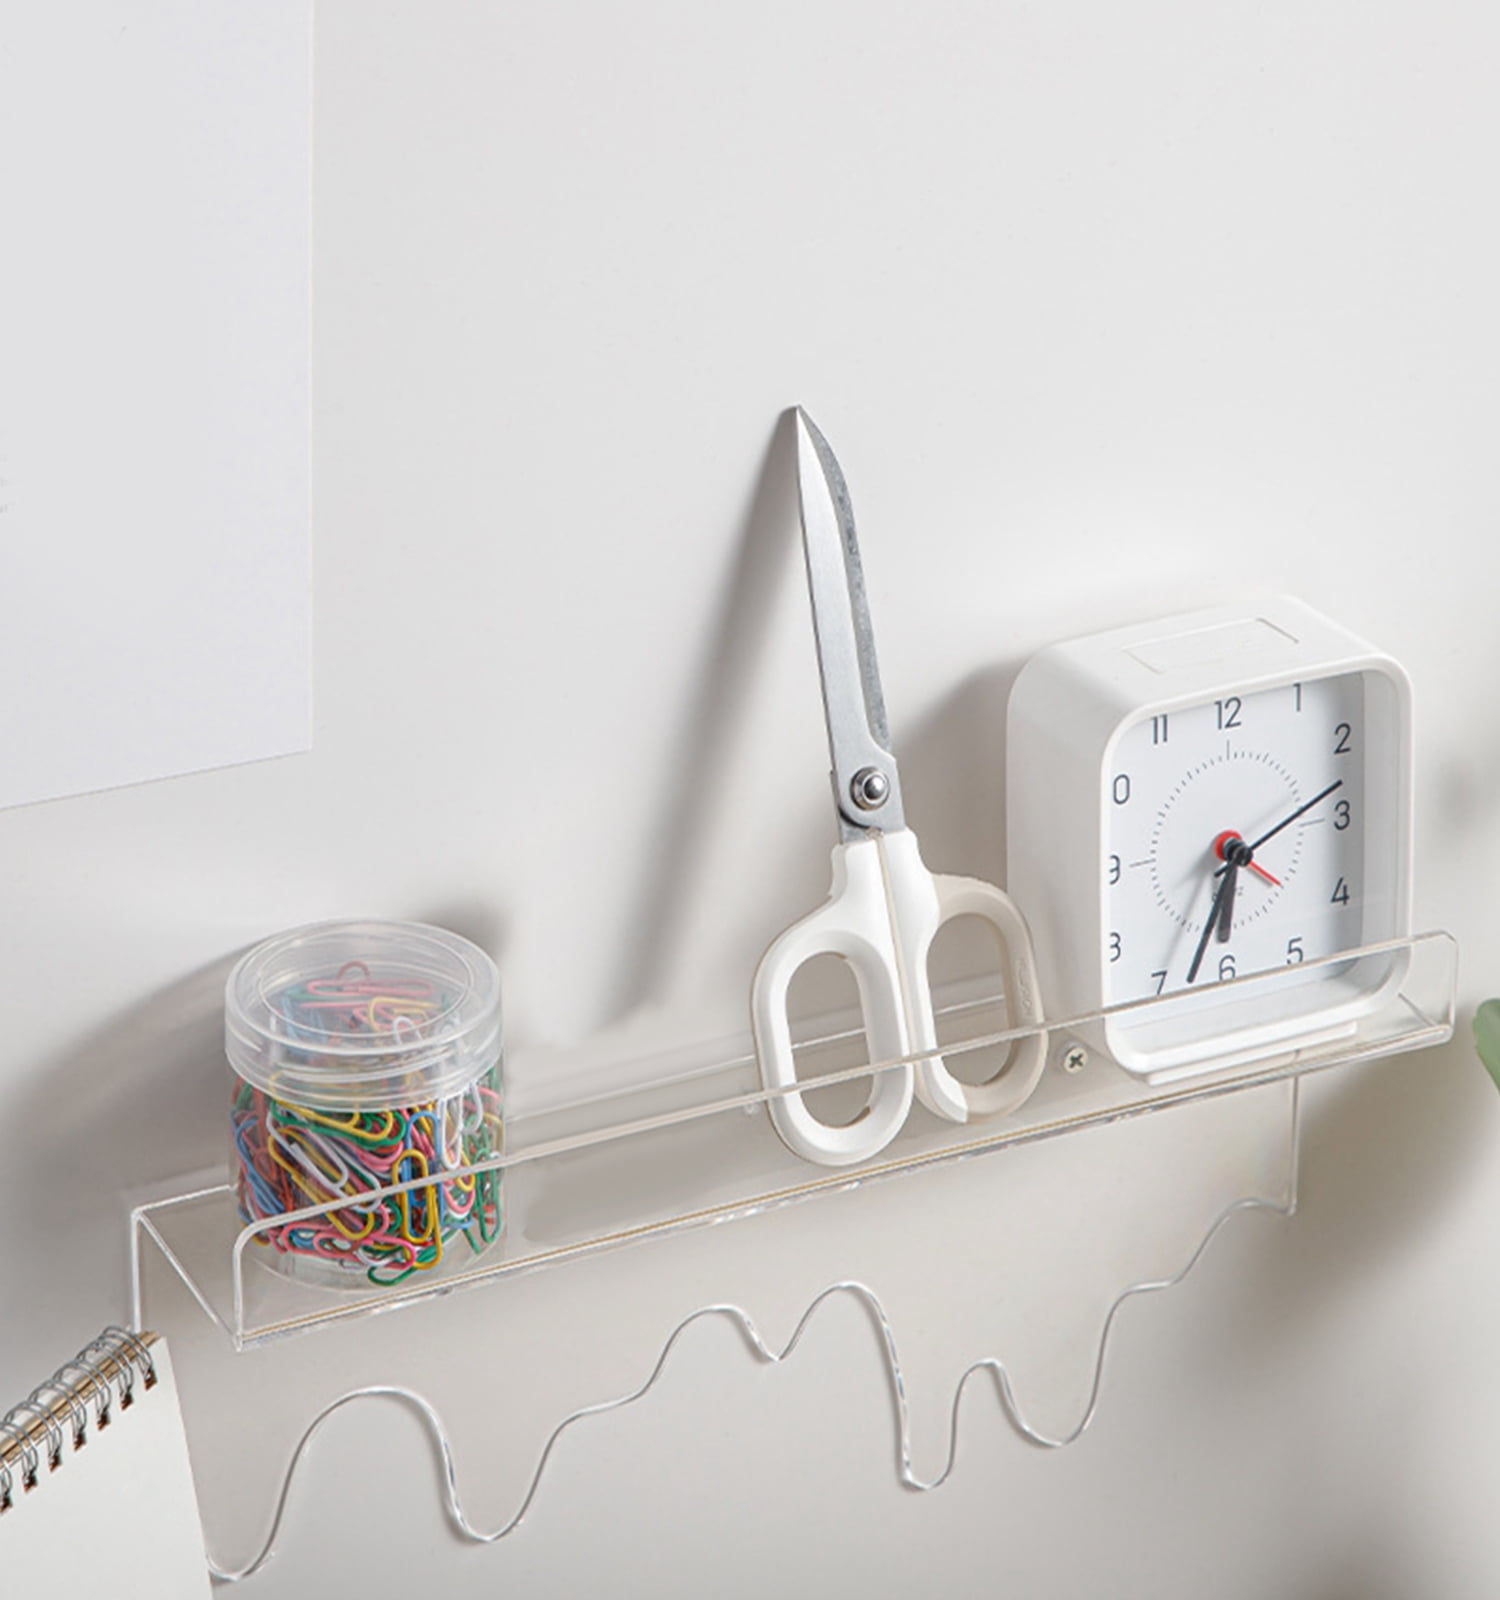 Wall Mounted Invisible Acrylic Bathroom Storage Shelves Space Saving  Floating Shelf For Organizing And Displaying From Faiokaver, $7.54